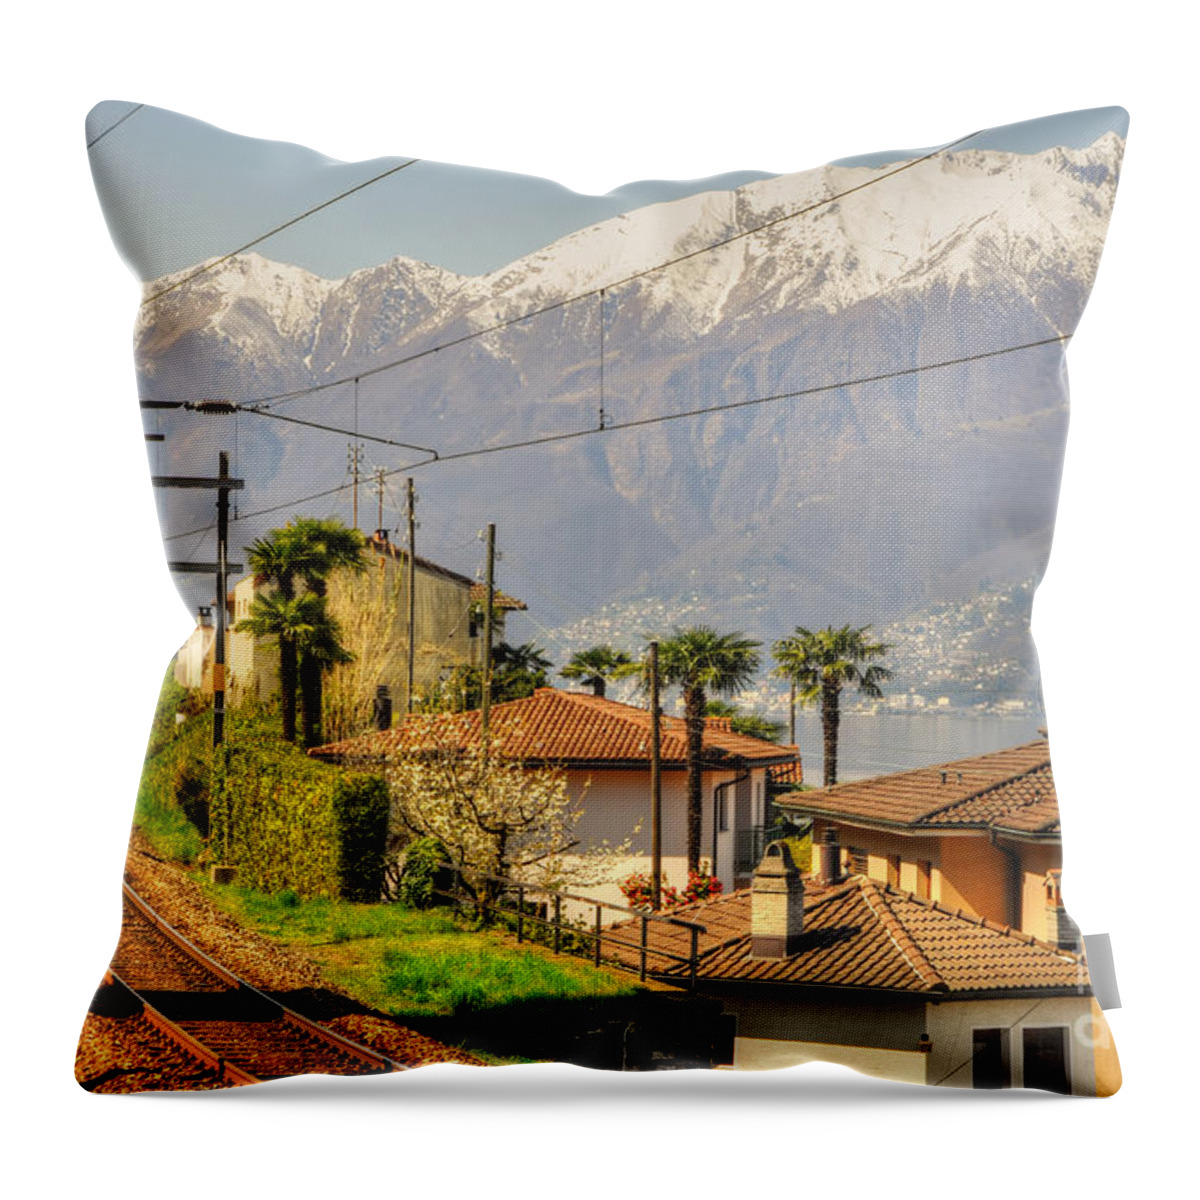 Railroad Tracks Throw Pillow featuring the photograph Railroad tracks and snow-capped mountain by Mats Silvan